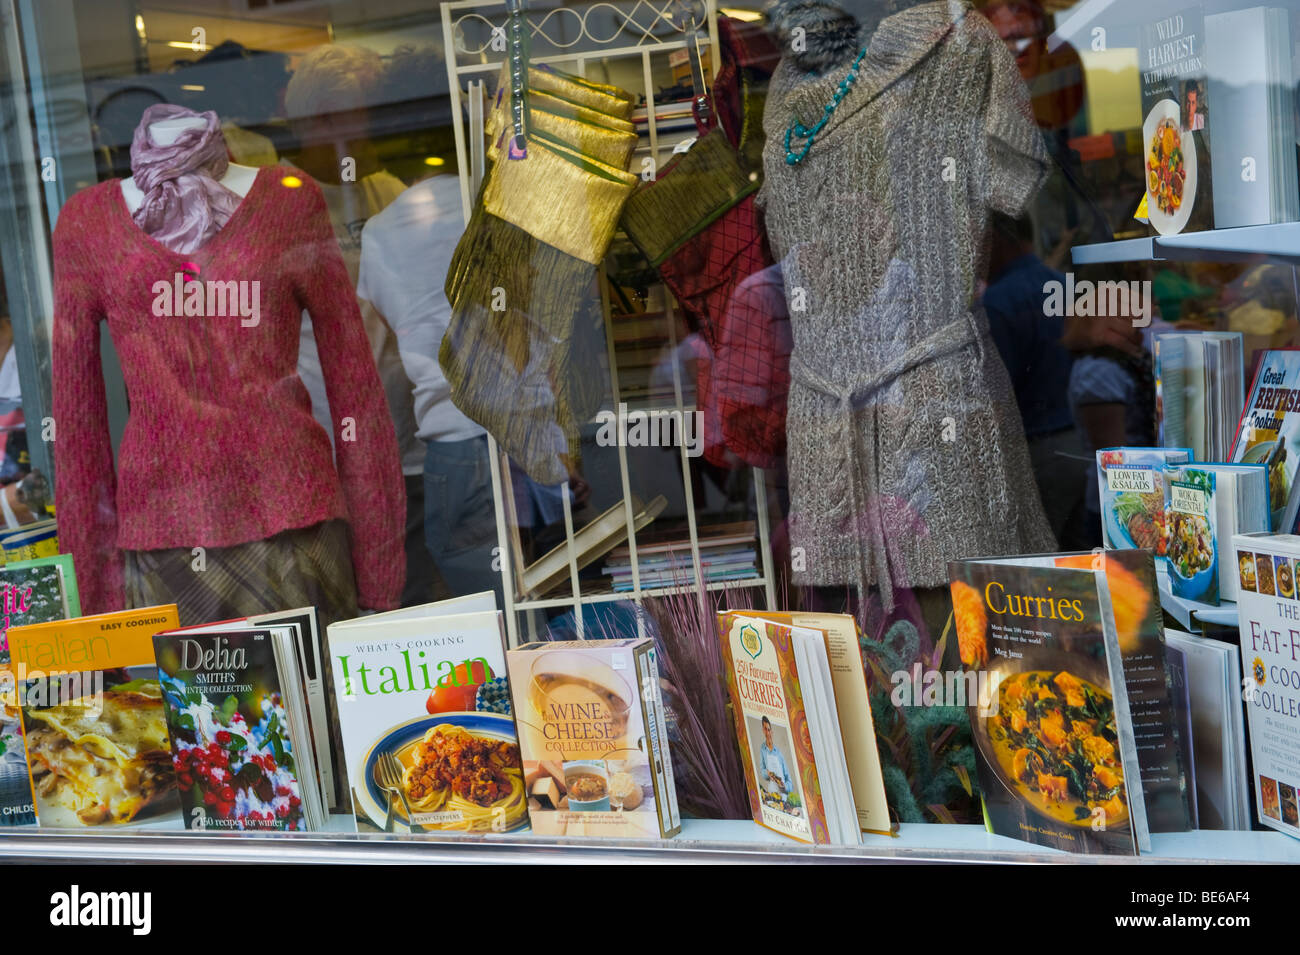 Display of cookery books and clothes for sale in charity shop during Abergavenny Food Festival Monmouthshire South Wales UK Stock Photo